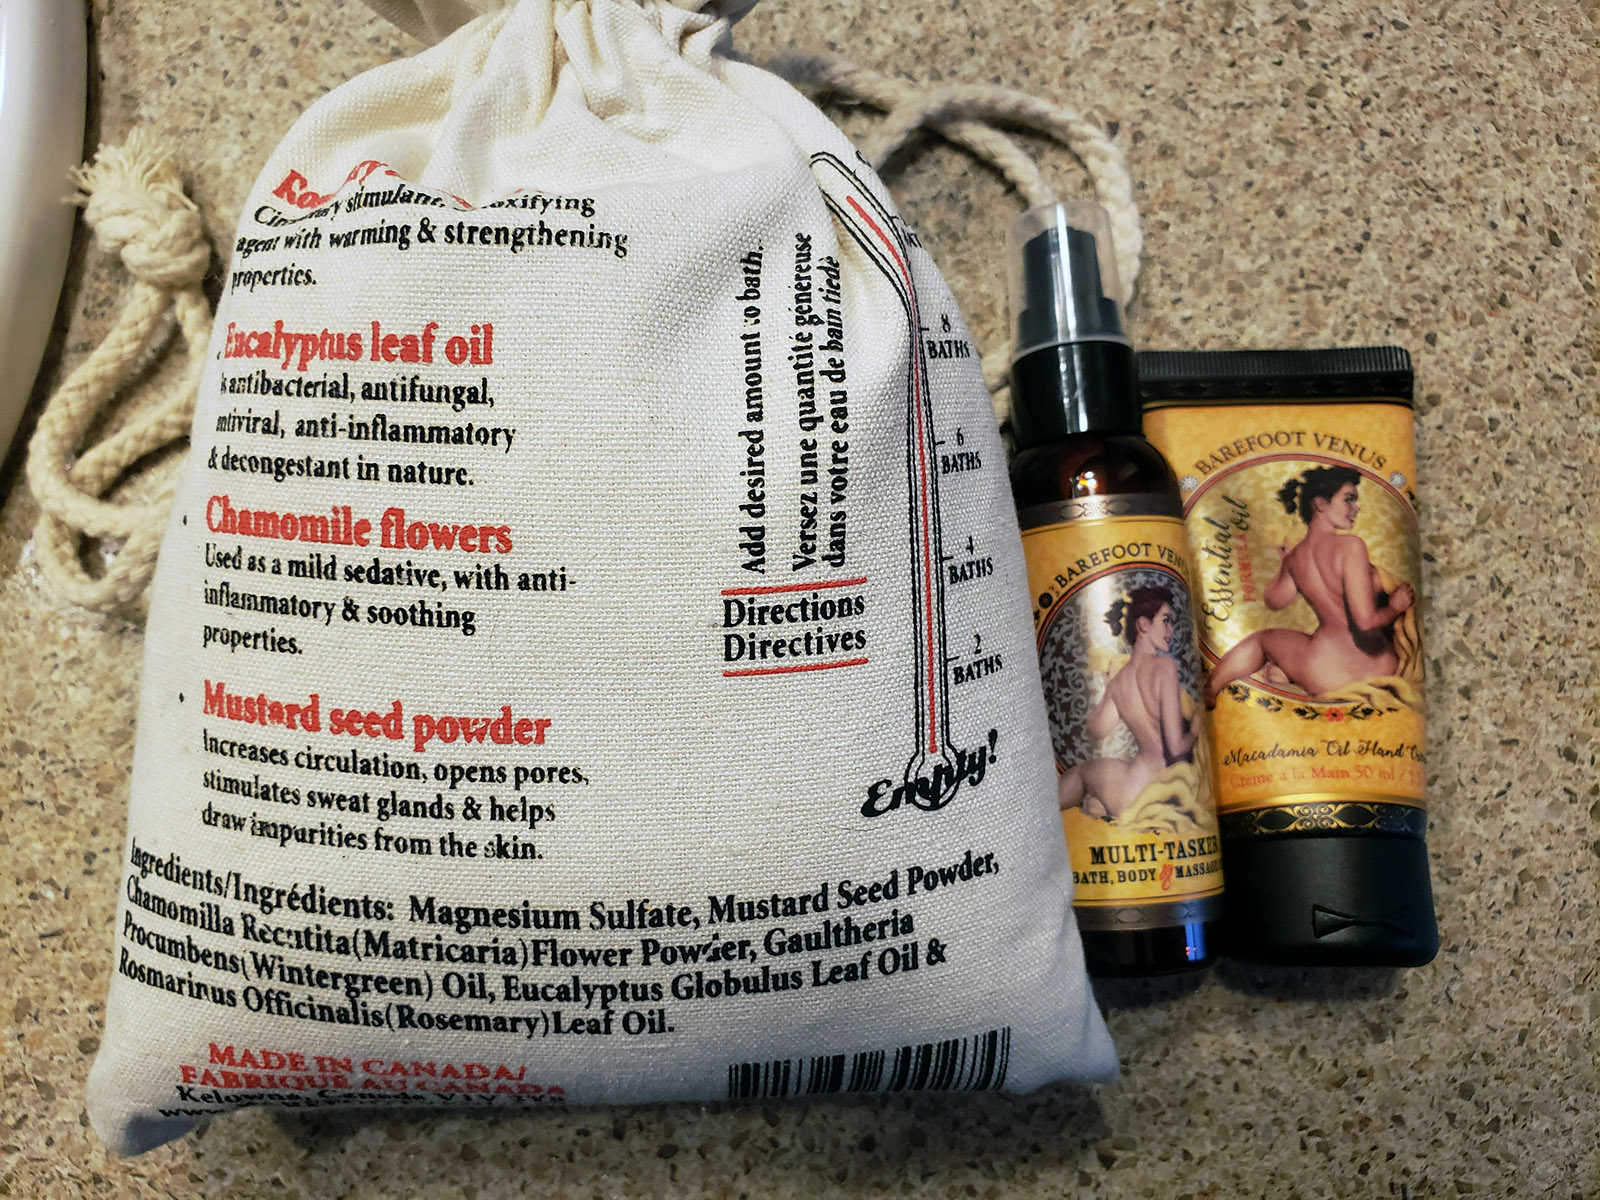 A bag of Barefoot Venus Mustard Bath, along with a lotion and an oil spray.